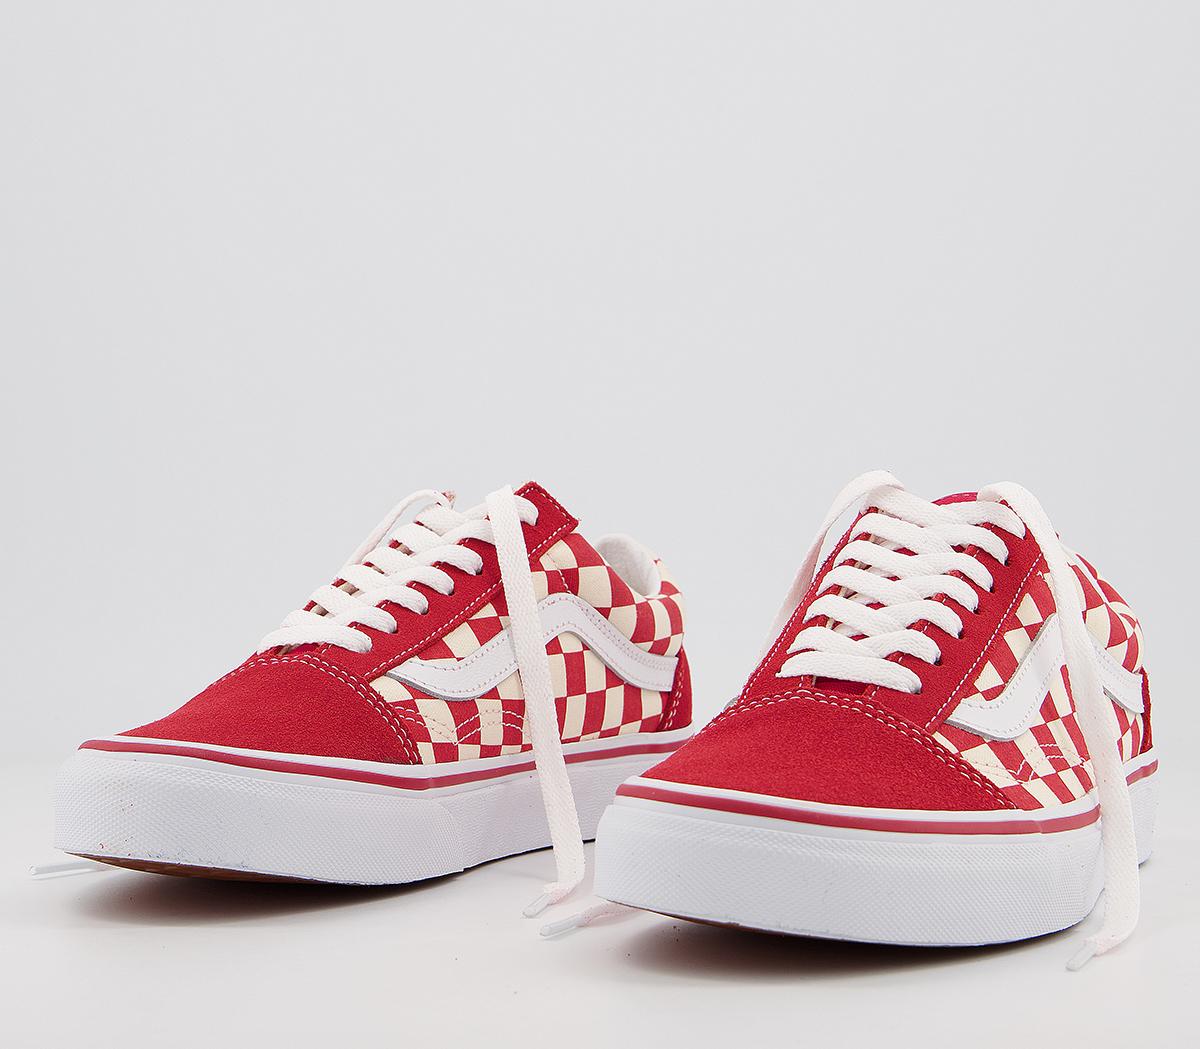 Vans Old Skool Trainers Red White Primary Check - Unisex Sports